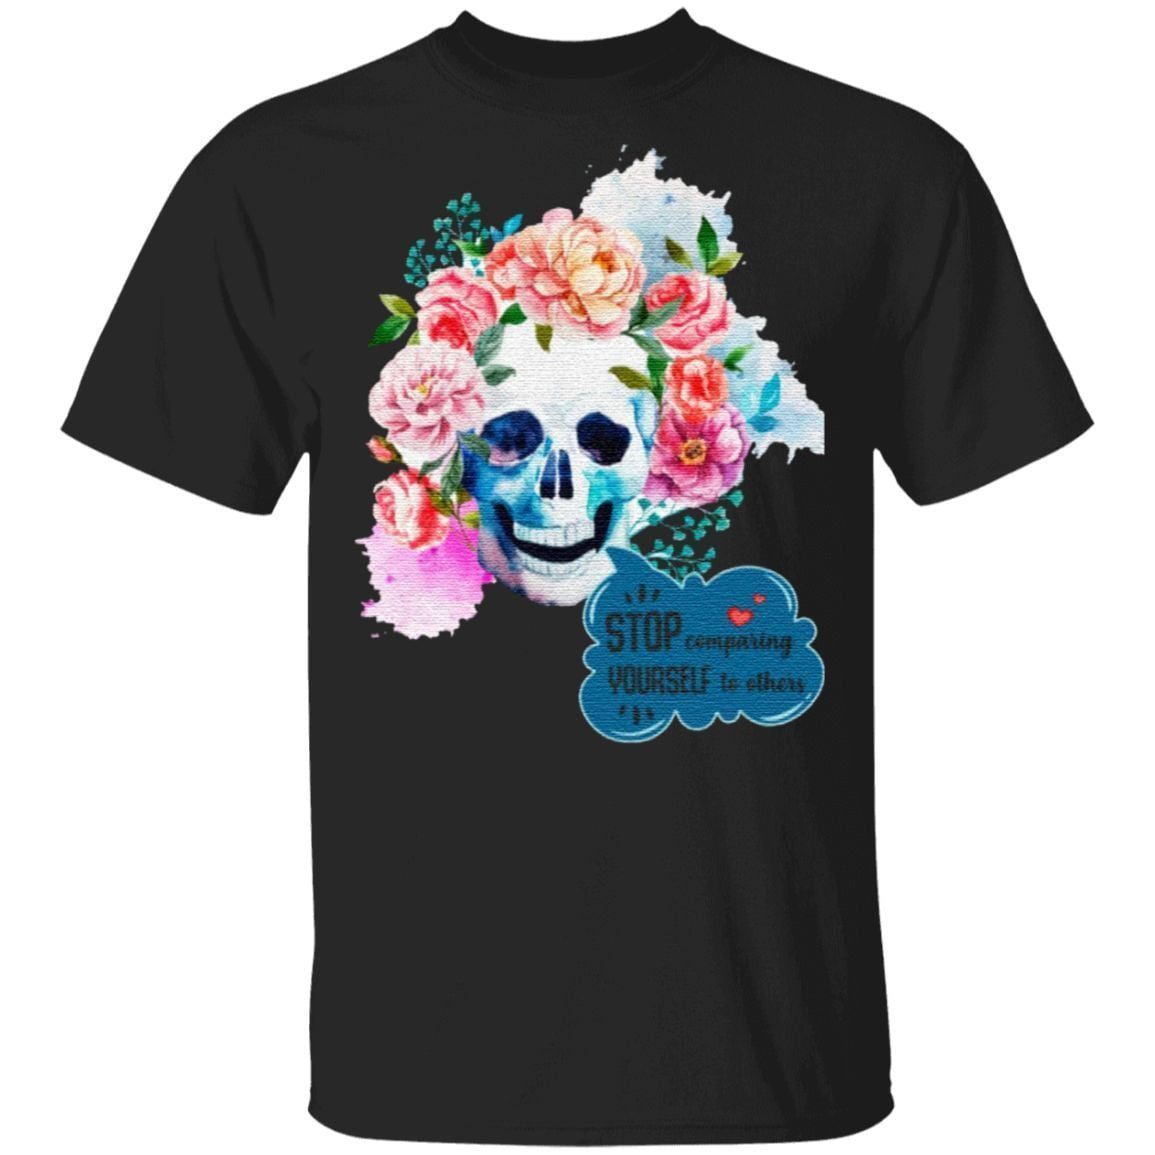 Stop Comparing Yourself To Others Women Feminist Skull Flower T-shirt